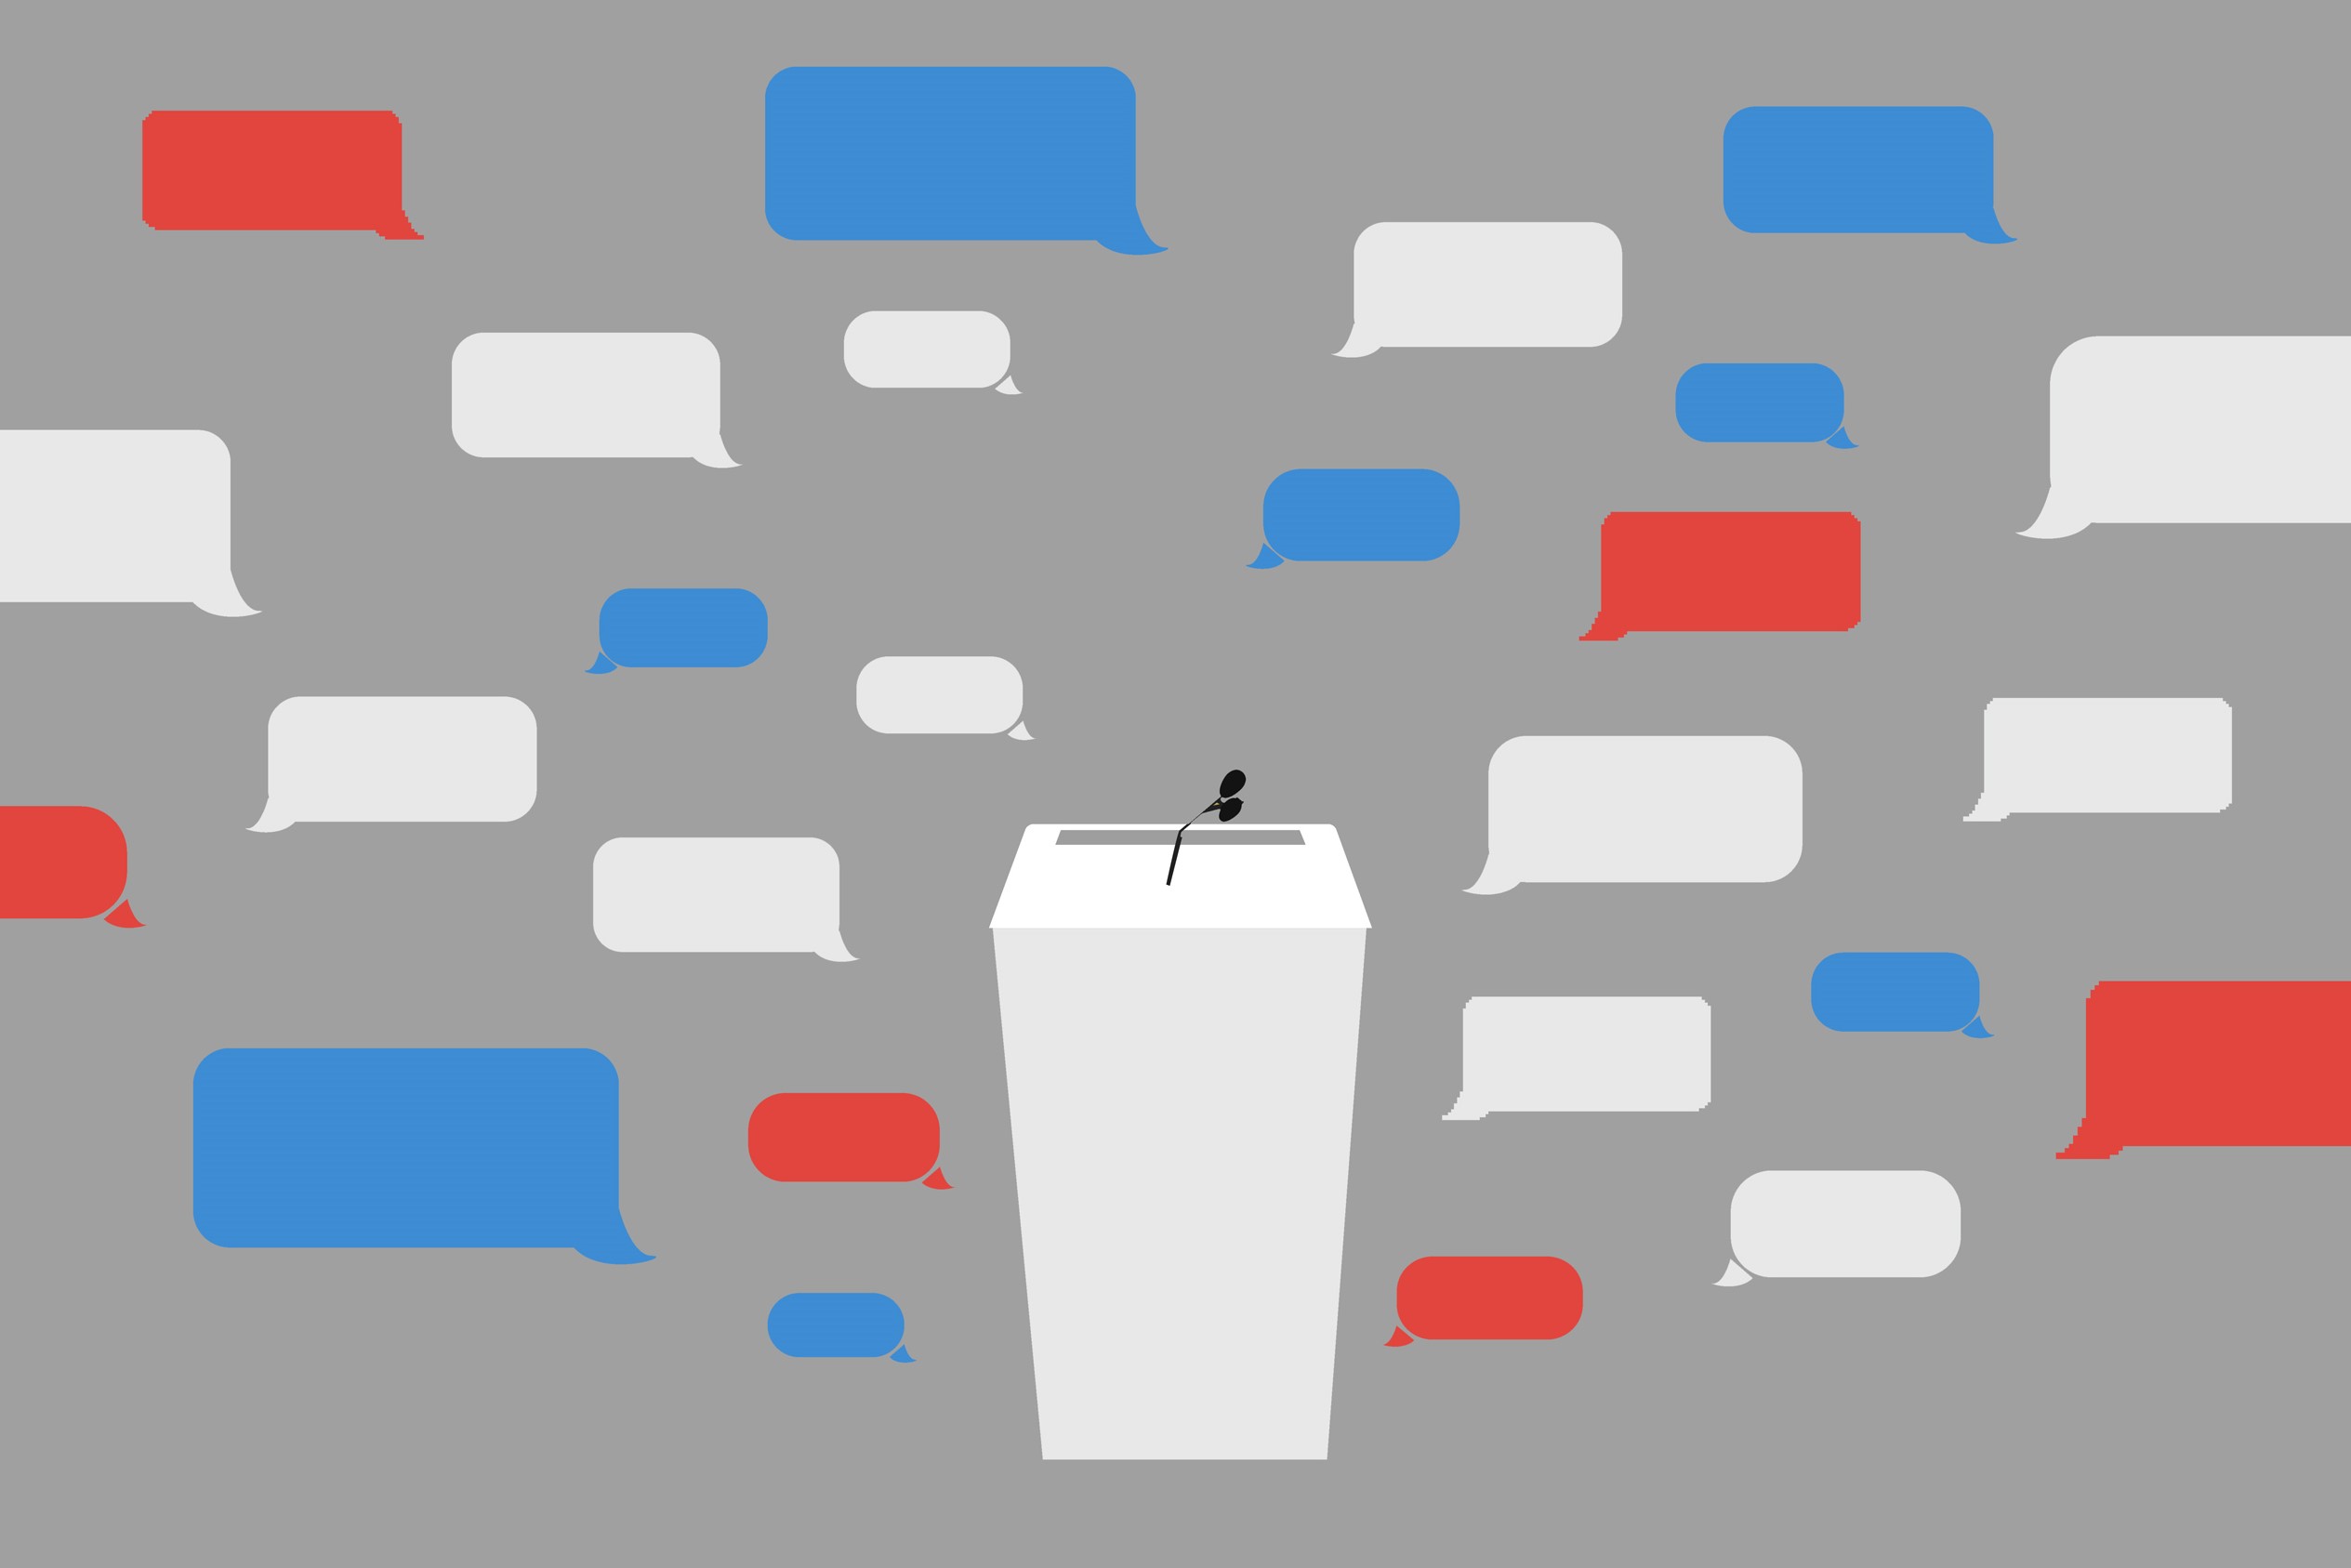 An election debate graphic from NPR.